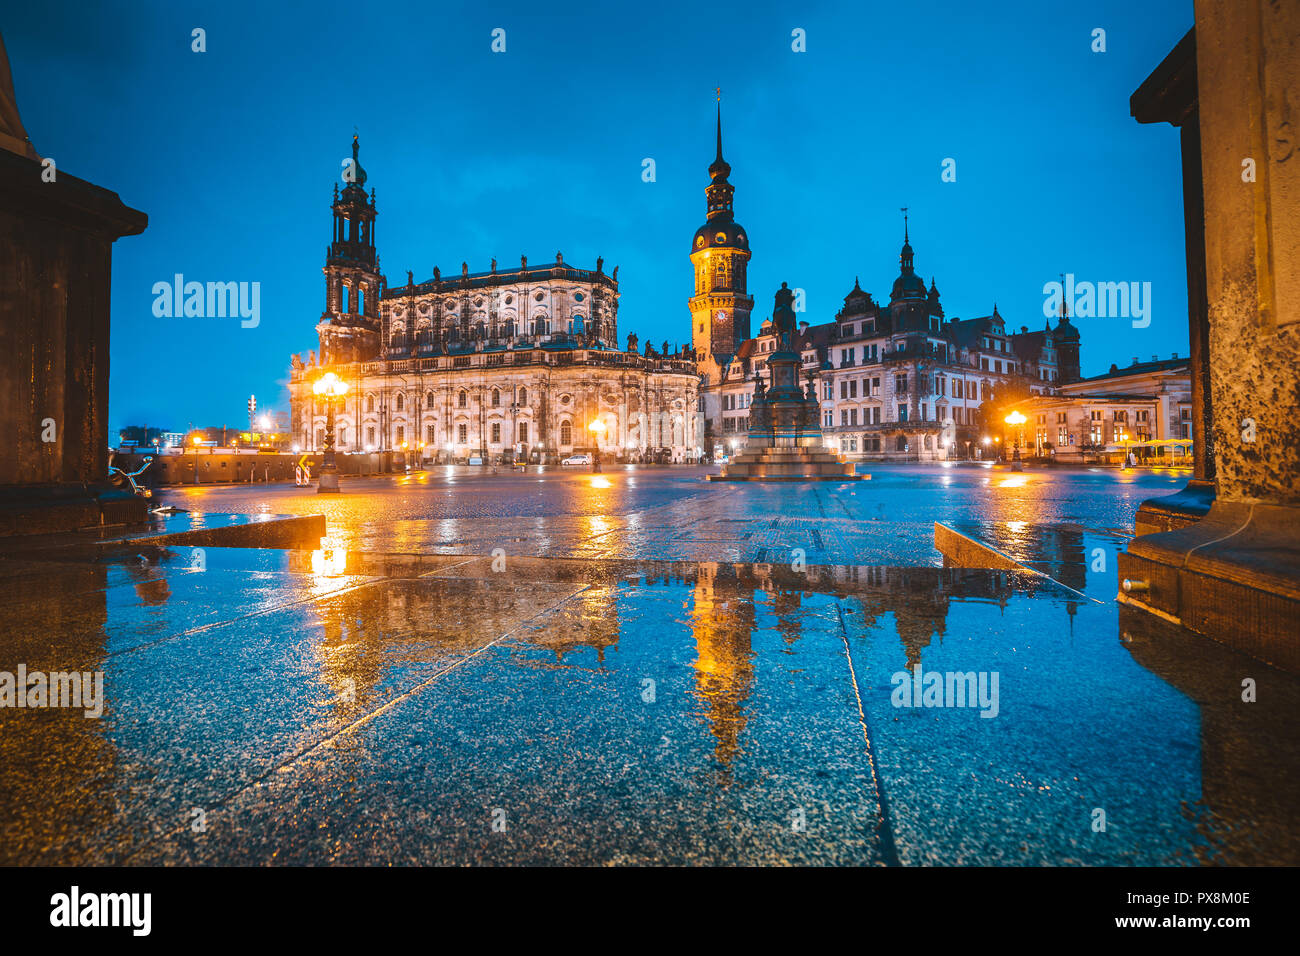 Classic twilight view of historic Dresden city center illuminated in beautiful evening twilight with dramatic sky during blue hour at dusk, Saxony, Ge Stock Photo